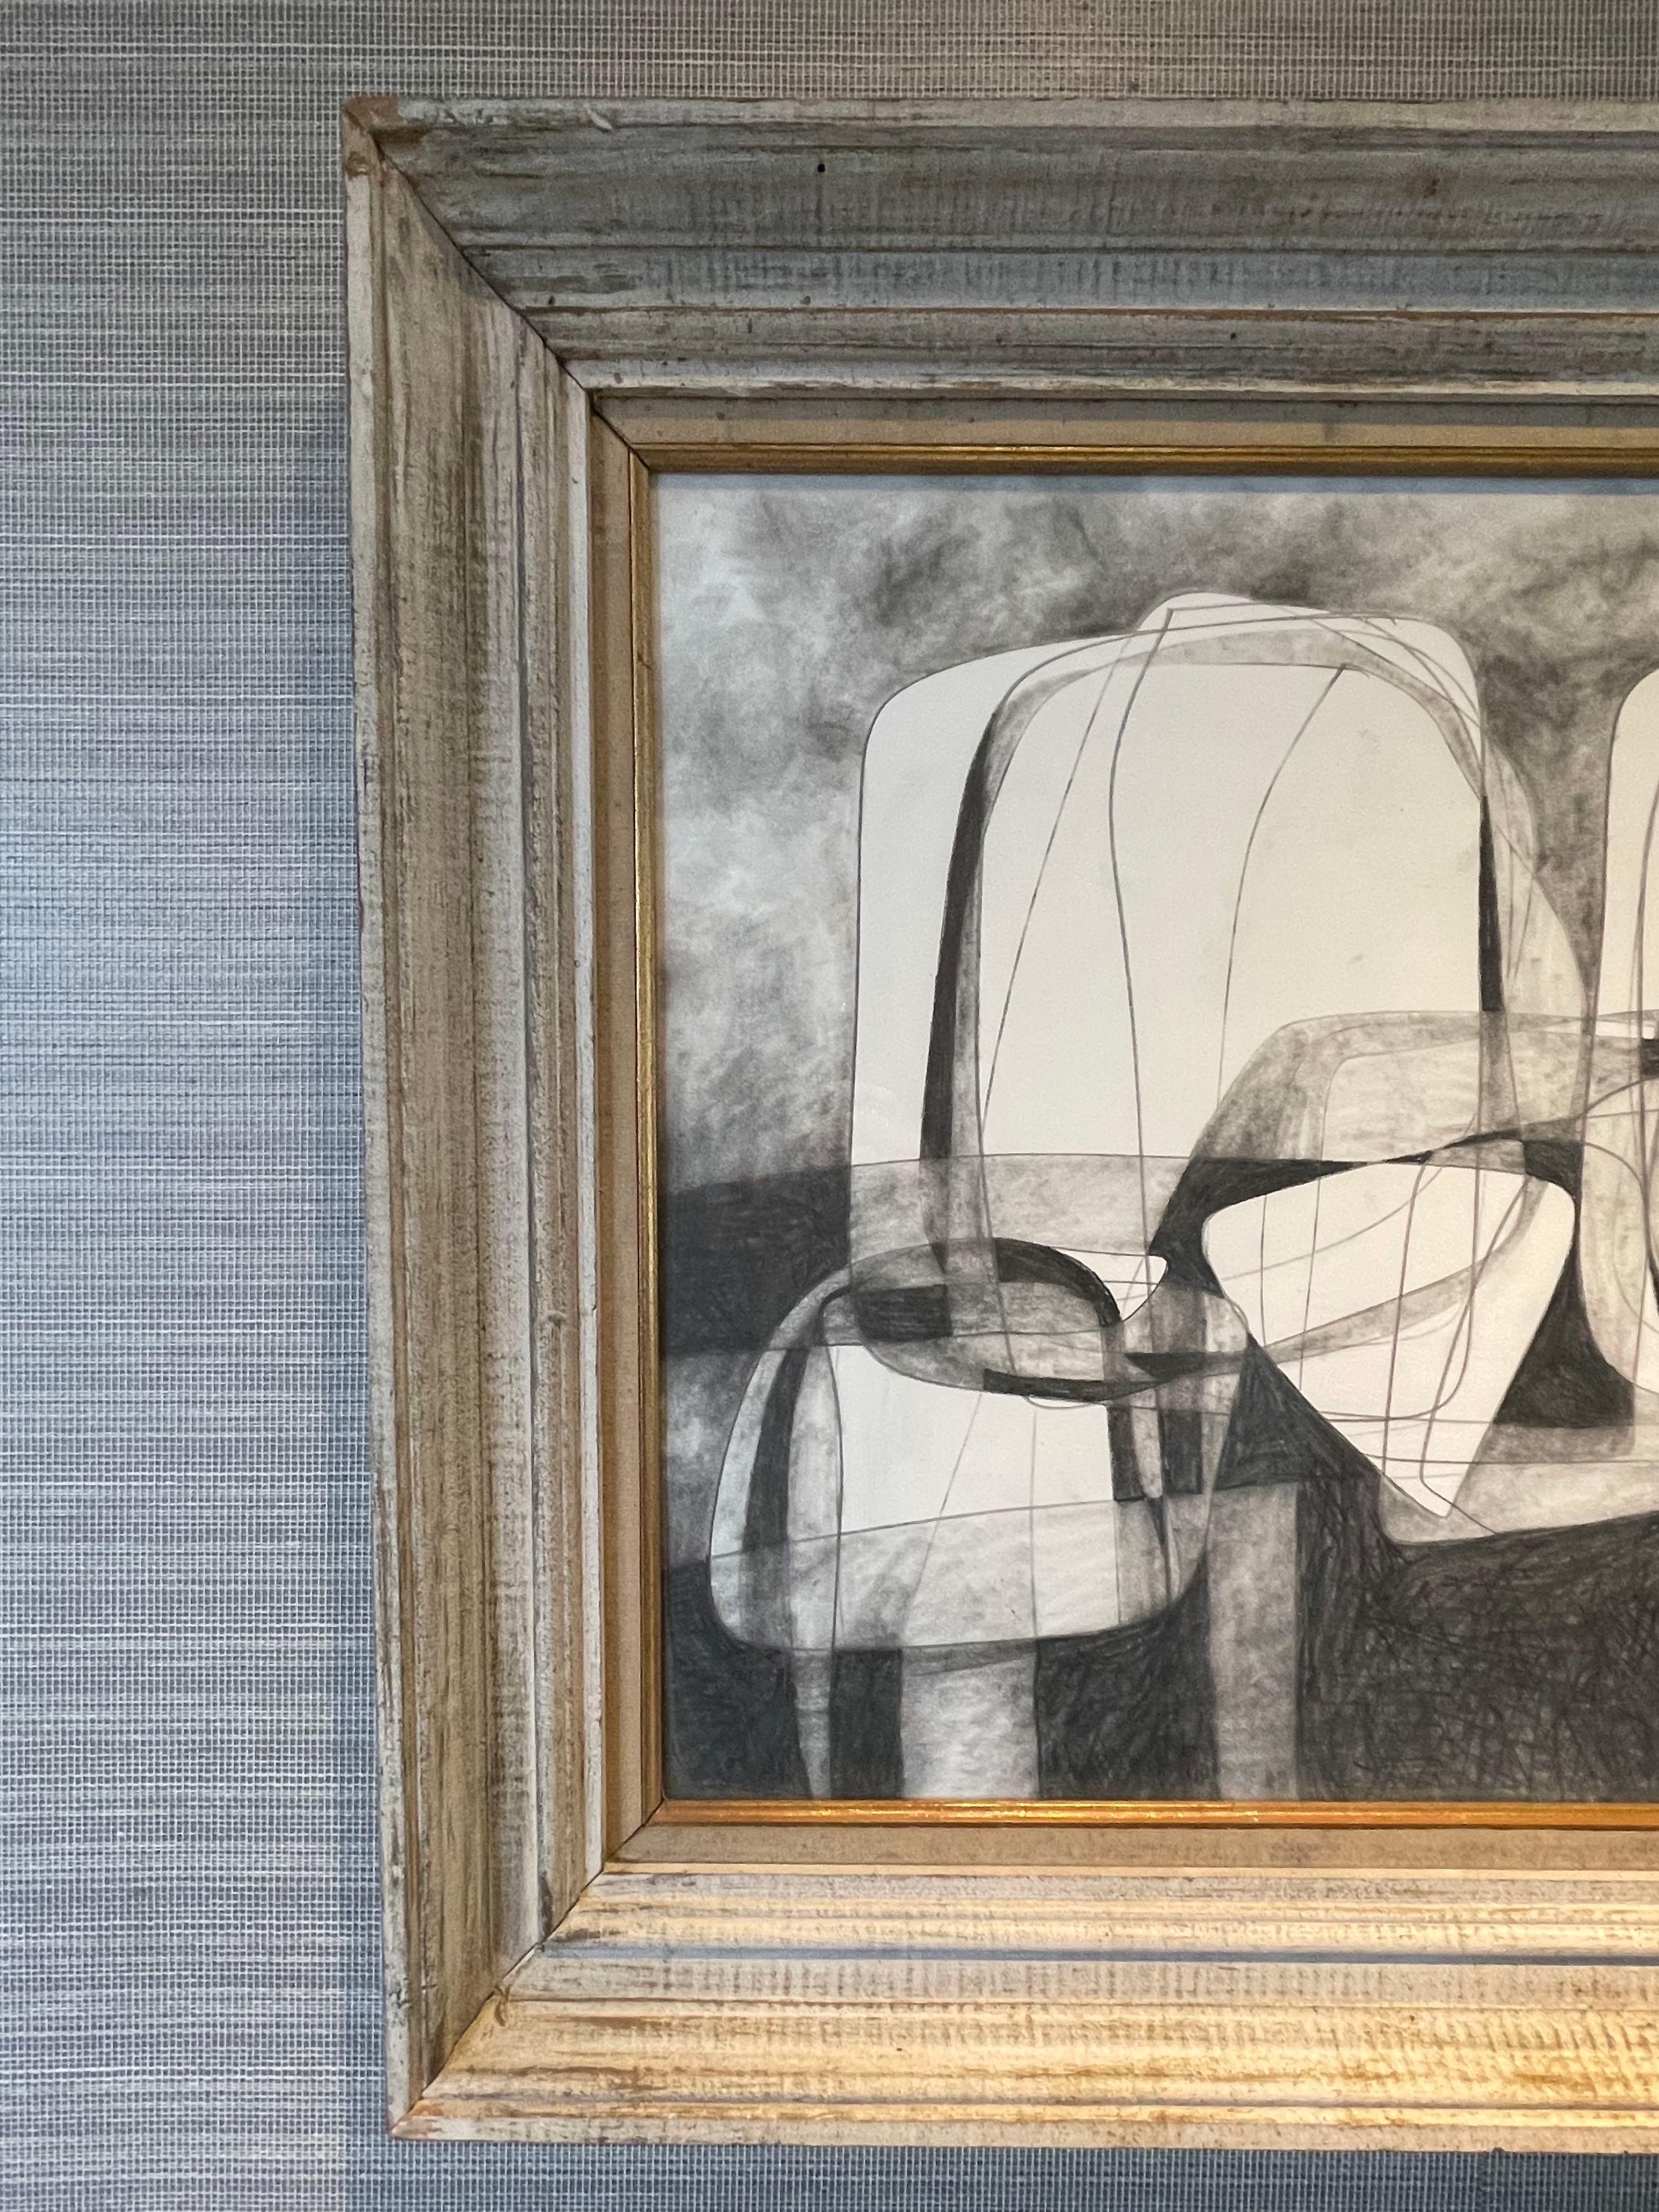 Original charcoal drawing by American artist David Dew Bruner in 2012
A study of two water lilies
Inspired by the artist Graham Sutherland
This is one of many pieces from a large body of works
Vintage weathered grey wood frame
Signed by the